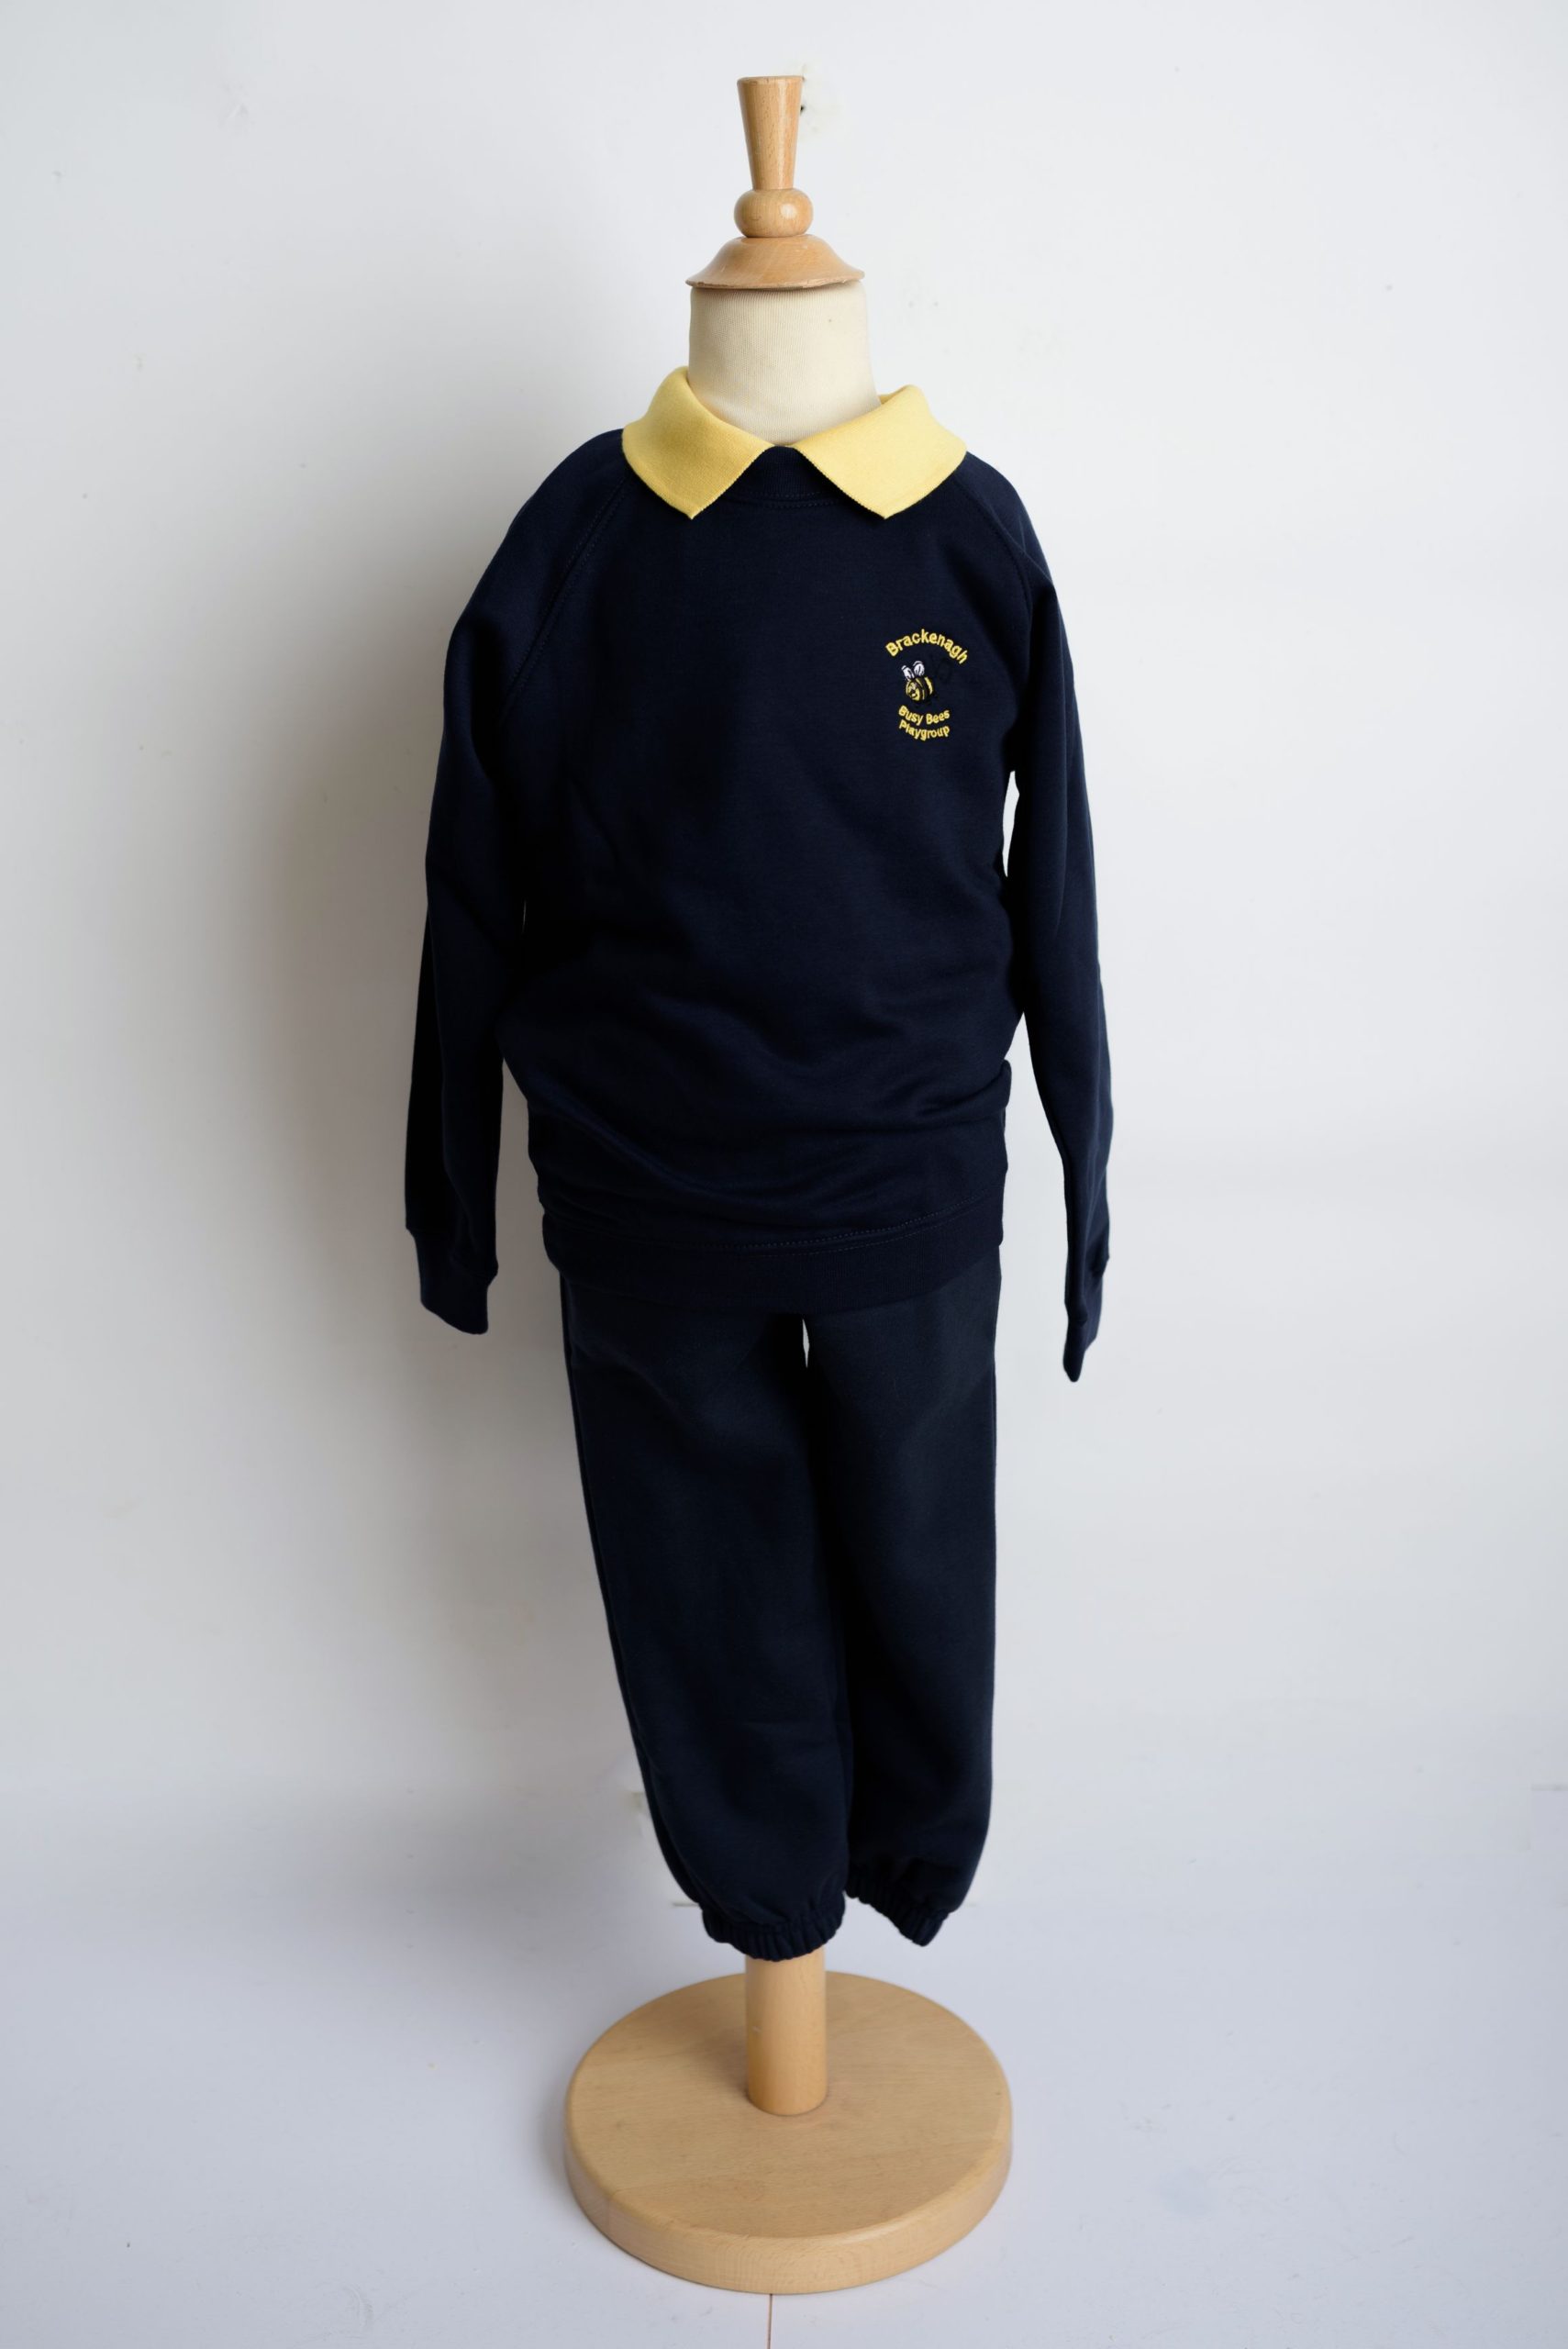 Busy Bees Playgroup Uniform